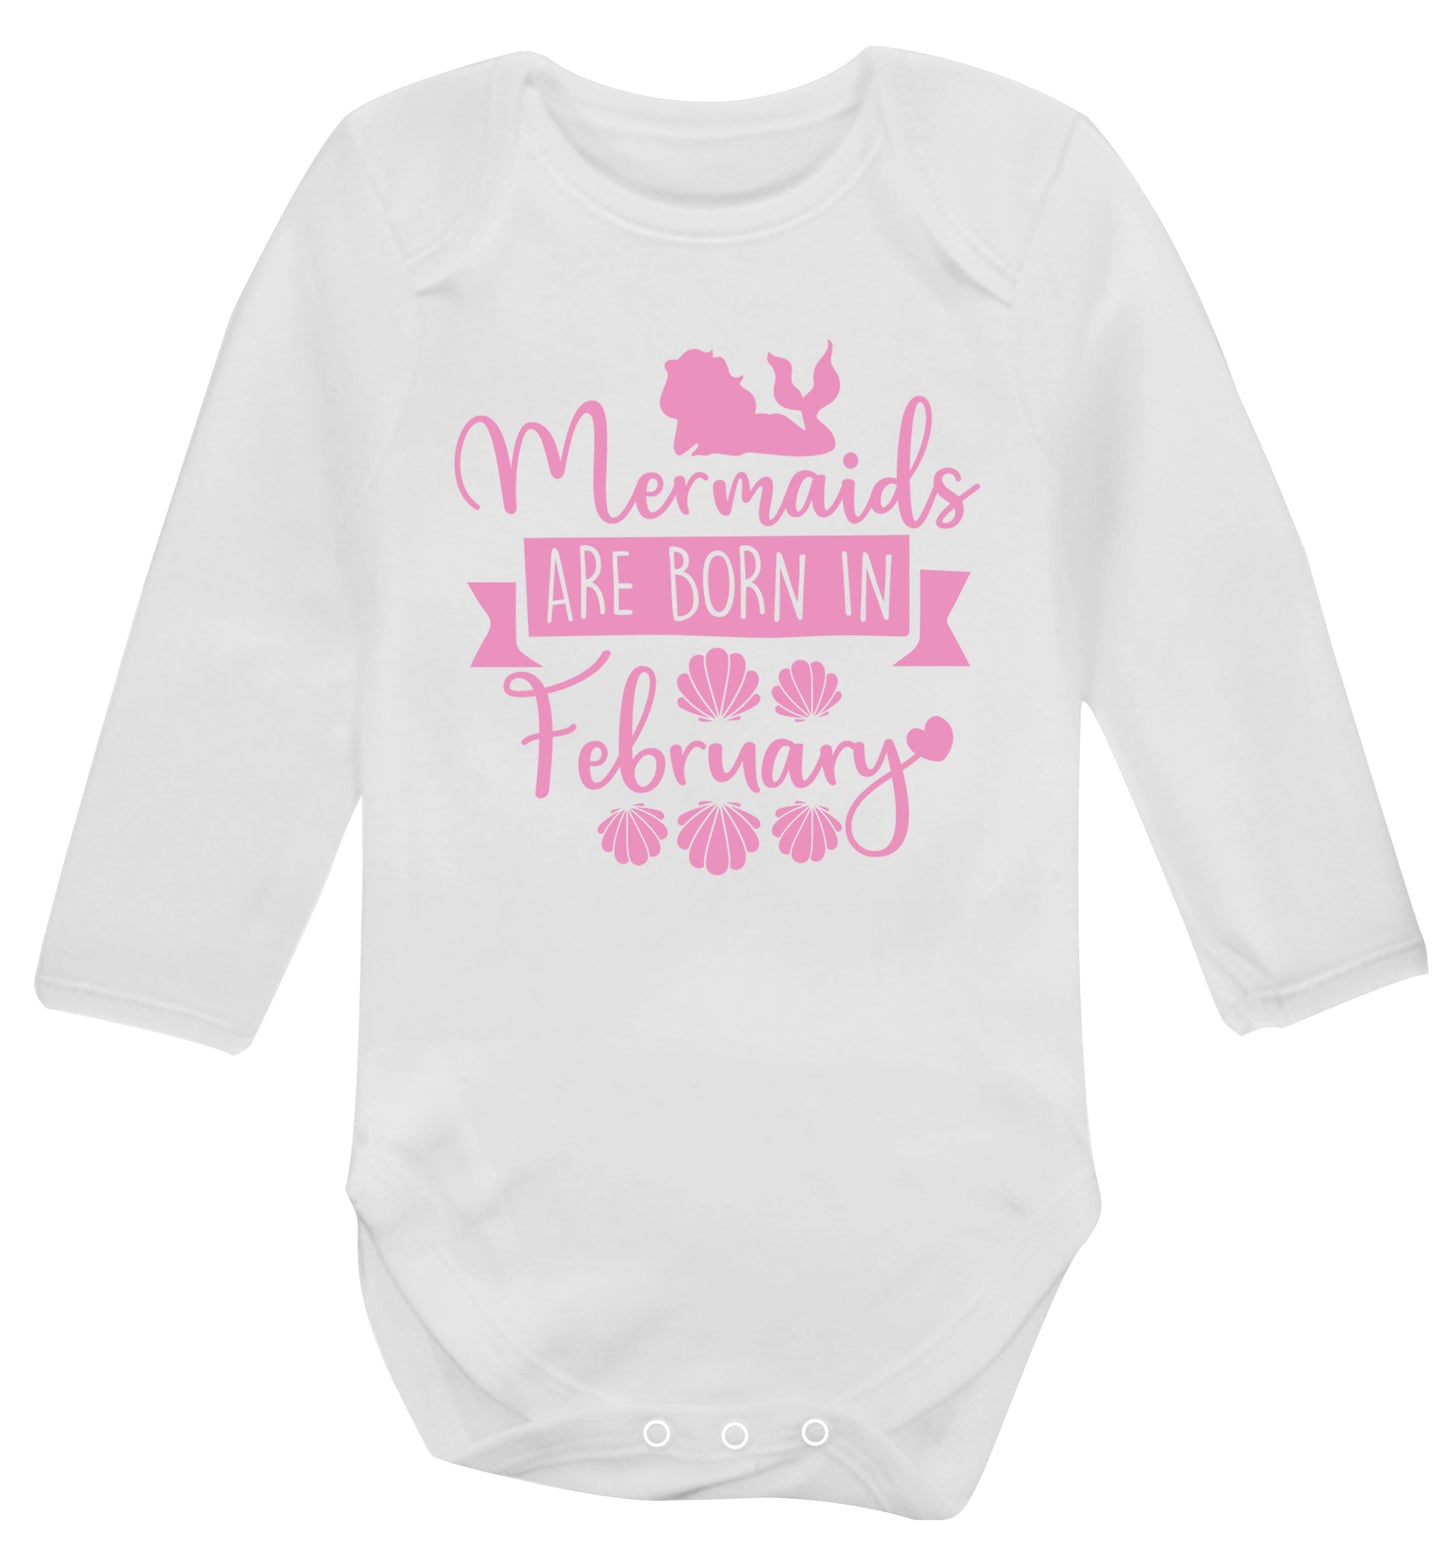 Mermaids are born in February Baby Vest long sleeved white 6-12 months